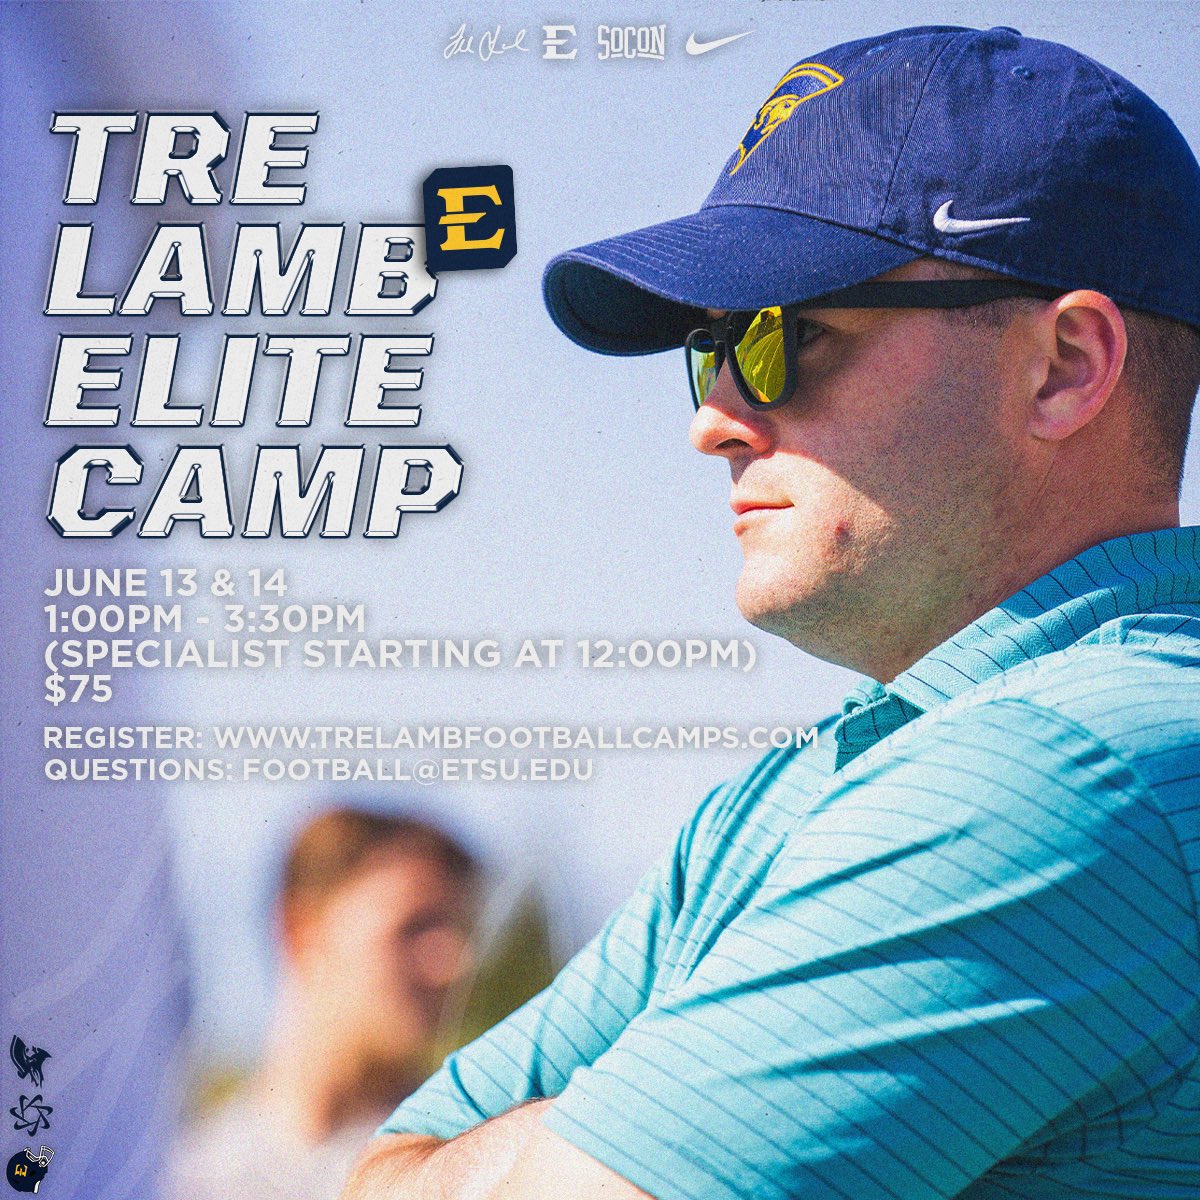 Thank you @ETSUFootball for the invite to The Elite Camp this summer. #ThePitt @SPHSPIRATES @SPCoachStone @QMccamey52 @CoachTreLamb9 @CoachIsaacVance @H_Gray94 @ReardonCoach @CoachPotter_ @JamoGriffith @On3sports @On3Recruits @247Sports @247recruiting @Rivals @RivalsCamp